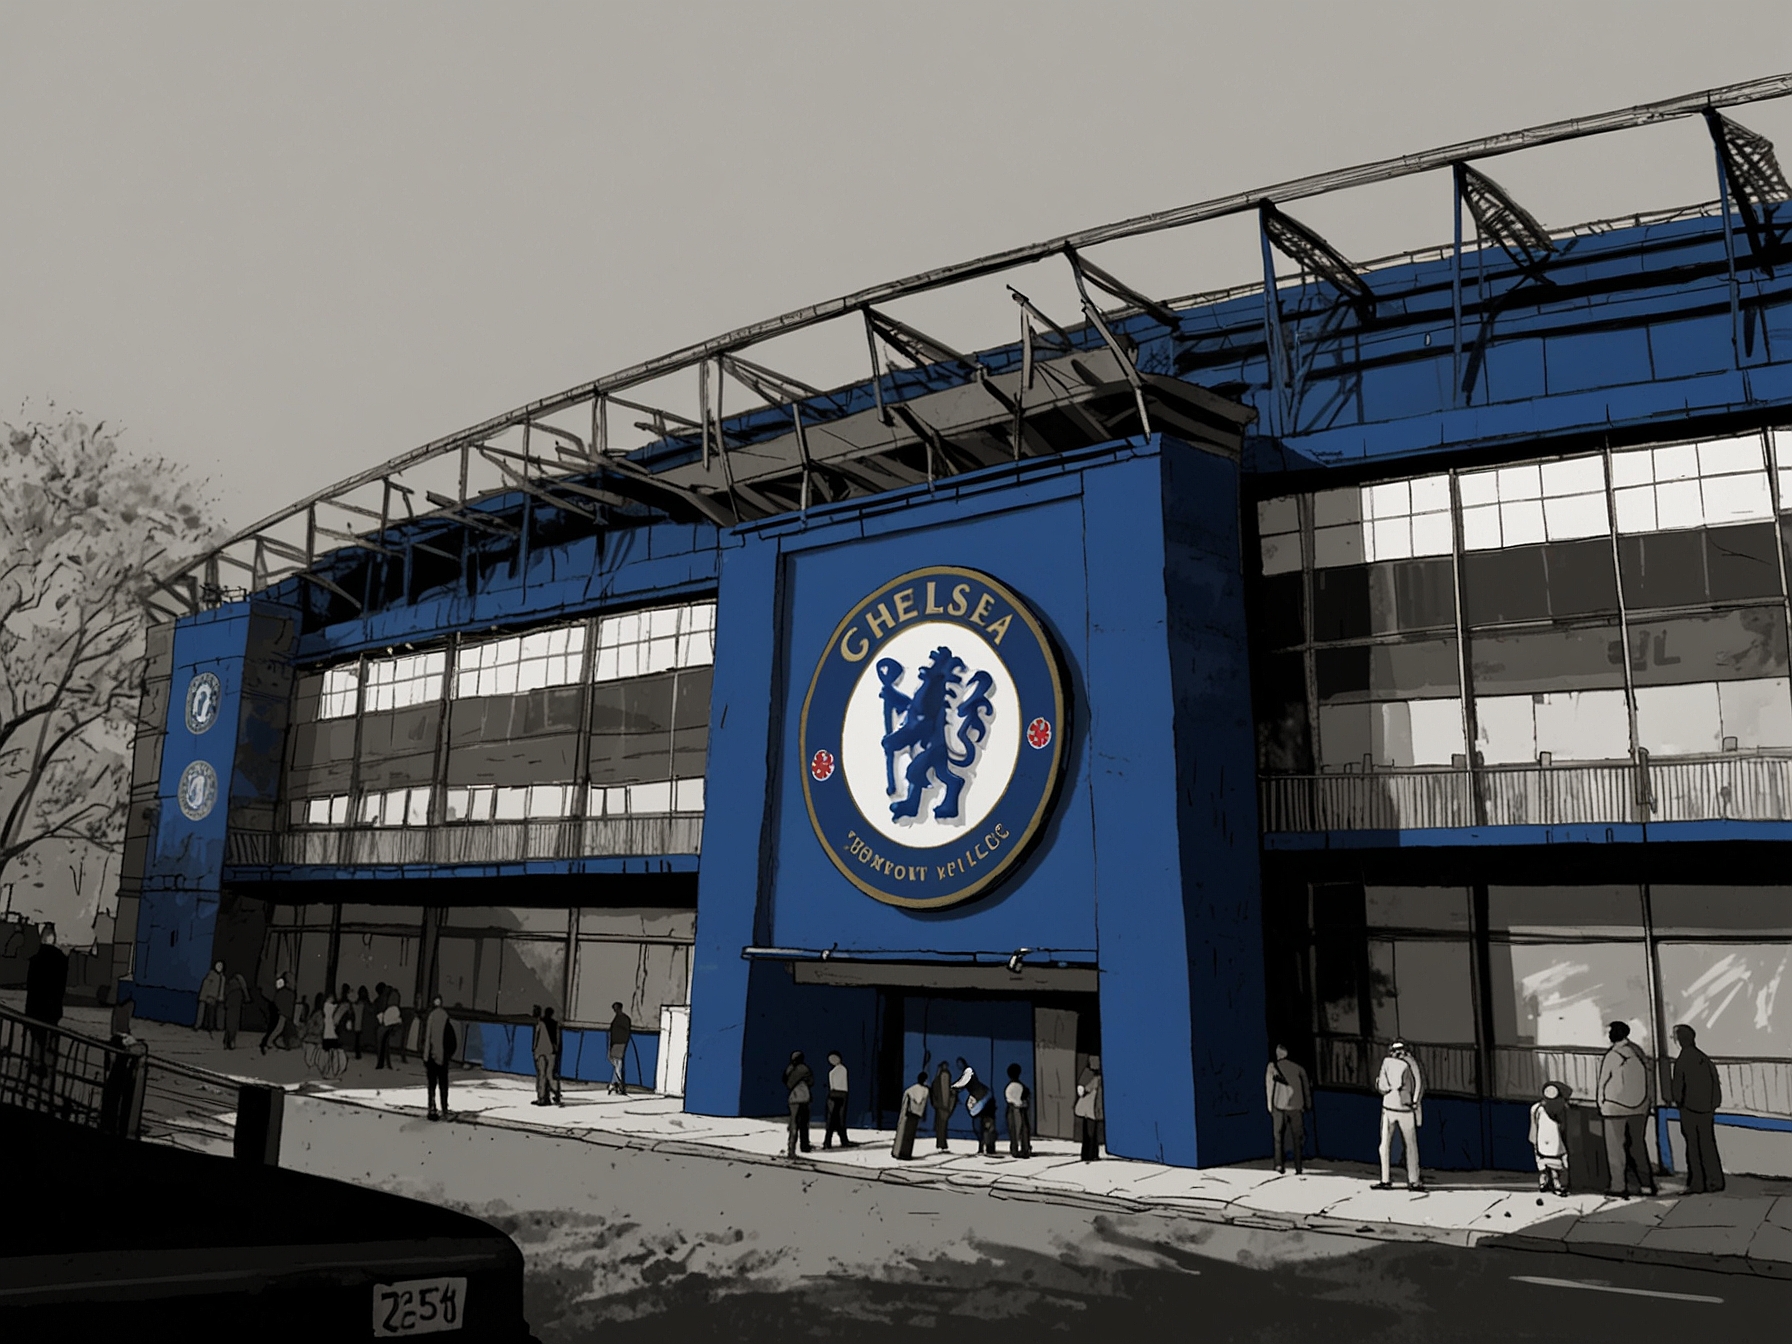 Outside Stamford Bridge with Chelsea’s emblem visible, fans eagerly await news about Jonathan David as transfer negotiations progress, representing the club's effort to strengthen their squad.